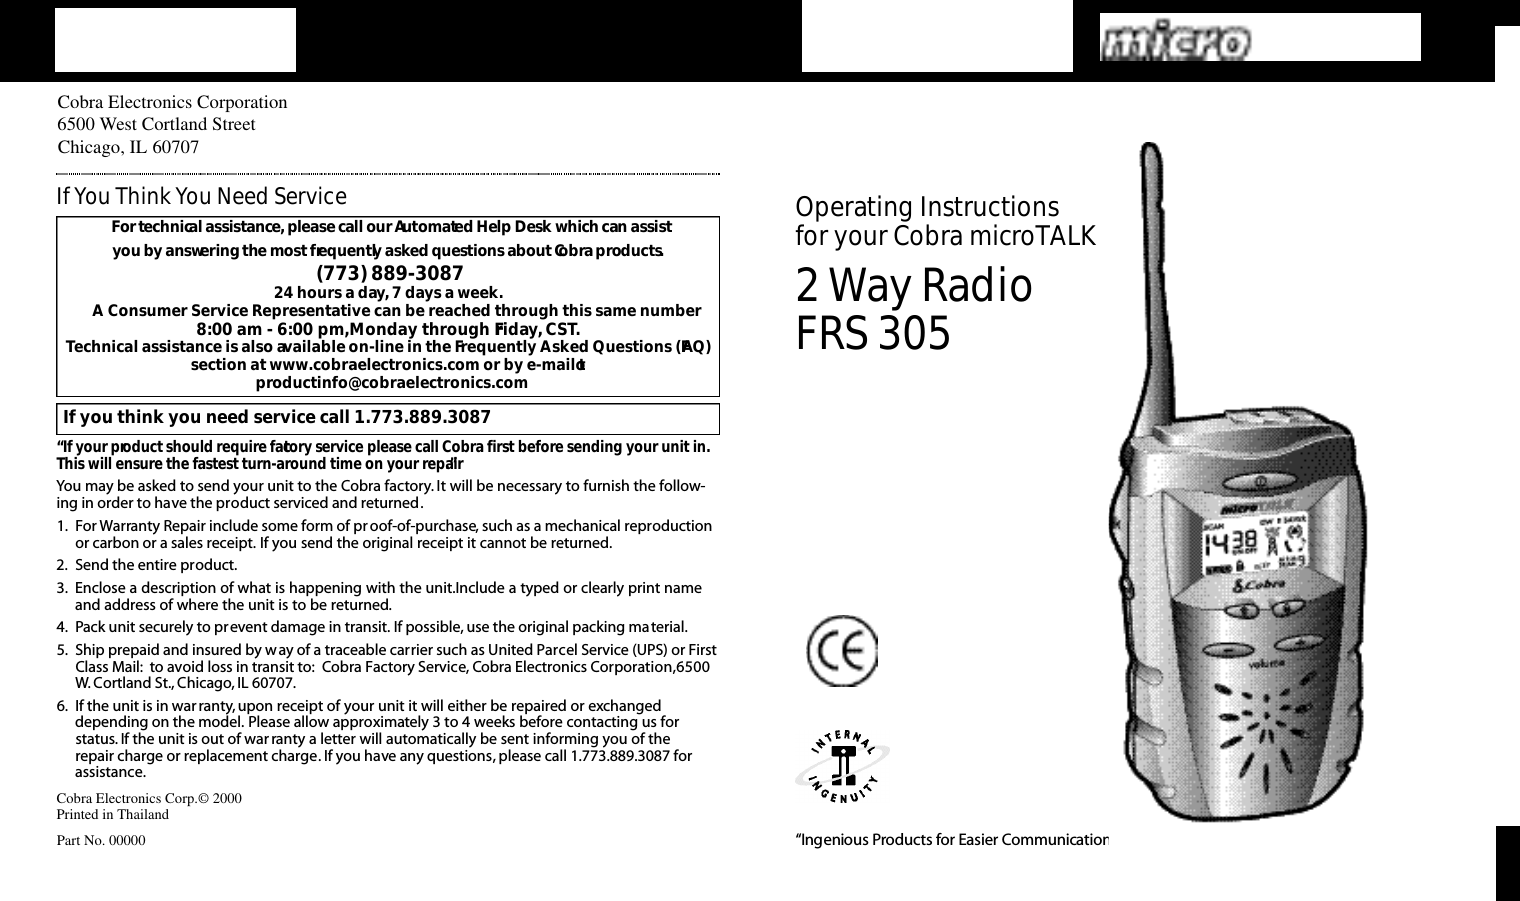 2Way RadioFRS 305O pe rating Instru ctions for your Co b ra micro TA L K“Ingenious Prod u cts for Easier Co m m u n i cat i o n .”Cobra Electronics Corporation6500 West Cortland StreetChicago, IL 60707Cobra Electronics Corp.© 2000Printed in ThailandPart No. 00000For te c h n i cal assistance,please call our Au to m a ted Help Desk which can assist you by answe ring the most fre q u e n t ly asked questions about Co b ra prod u ct s.(773) 889-3087 24 hours a day, 7 days a week.A Consumer Service Representative can be reached through this same number 8:00 am - 6:00 pm,Monday through Friday, CST.Technical assistance is also available on-line in the Frequently Asked Questions (FAQ)section at www.cobraelectronics.com or by e-mail toproductinfo@cobraelectronics.comIf you think you need service call 1.773.889.3087“If your product should require factory service please call Cobra first before sending your unit in.This will ensure the fastest turn-around time on your repair.”You may be asked to send your unit to the Cobra factory. It will be necessary to furnish the follow-ing in order to have the product serviced and returned.1. For Warranty Repair include some form of proof-of-purchase, such as a mechanical reproductionor carbon or a sales receipt. If you send the original receipt it cannot be returned.2. Send the entire product.3. Enclose a description of what is happening with the unit.Include a typed or clearly print nameand address of where the unit is to be returned.4. Pack unit securely to prevent damage in transit. If possible, use the original packing material.5. Ship prepaid and insured by way of a traceable carrier such as United Parcel Service (UPS) or FirstClass Mail: to avoid loss in transit to: Cobra Factory Service, Cobra Electronics Corporation,6500W. Cortland St., Chicago, IL 60707.6. If the unit is in war ranty,upon receipt of your unit it will either be repaired or exchangeddepending on the model. Please allow approximately 3 to 4 weeks before contacting us for status. If the unit is out of war ranty a letter will automatically be sent informing you of the repair charge or replacement charge. If you have any questions, please call 1.773.889.3087 forassistance.IfYou Think You Need Service